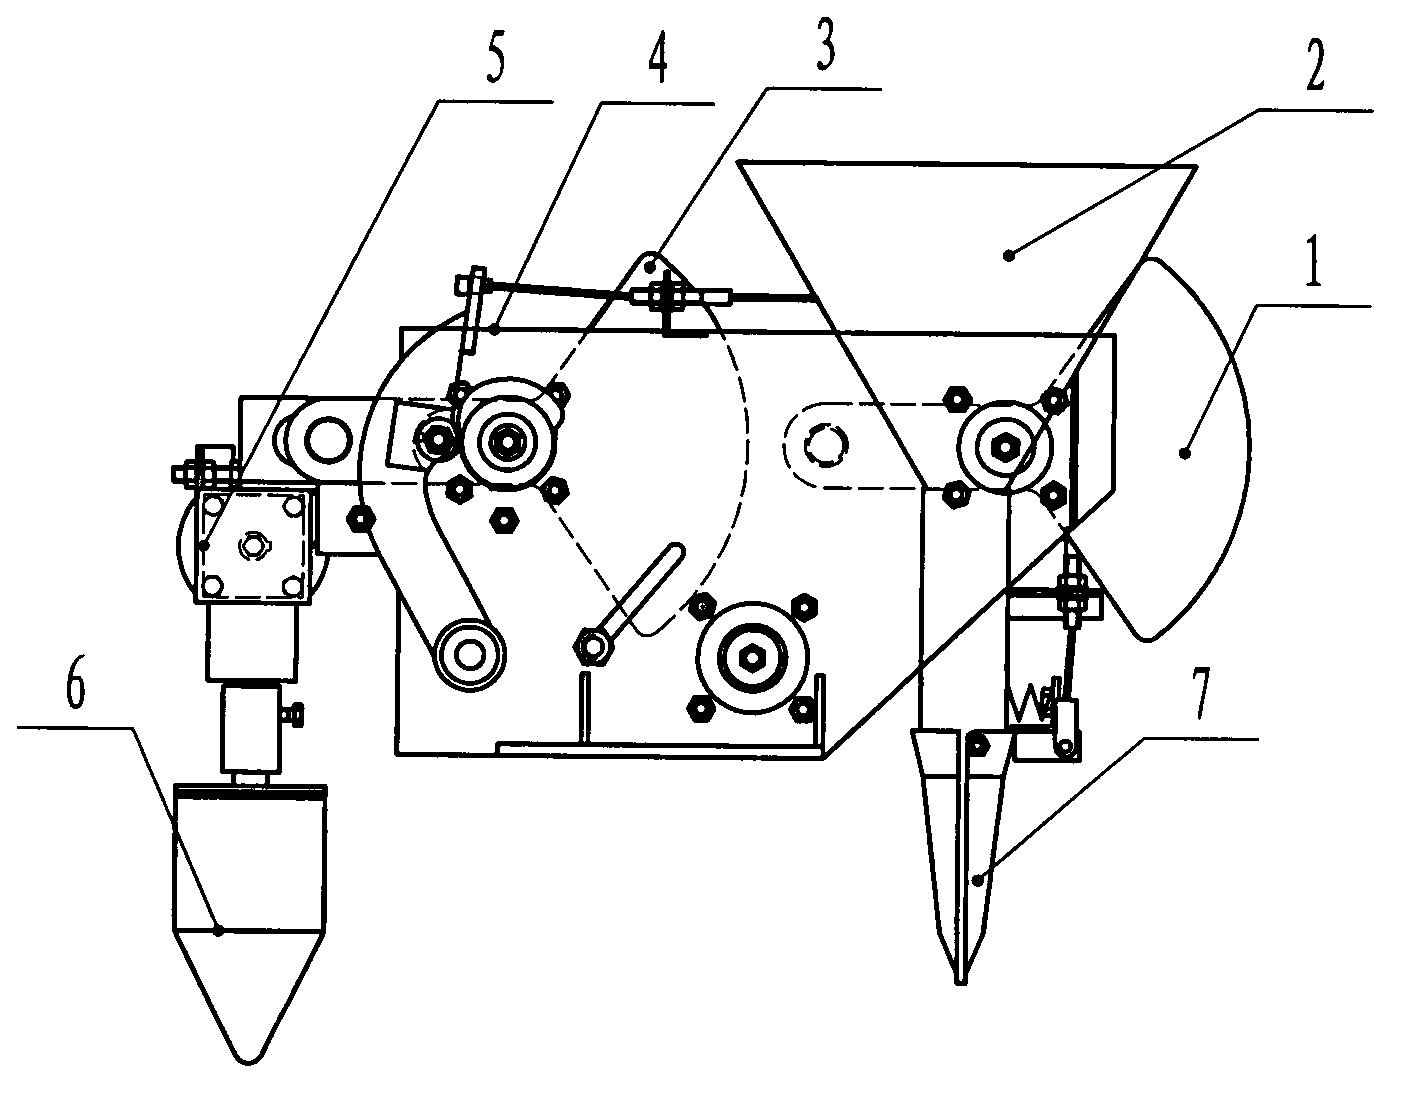 Punching and transplanting device